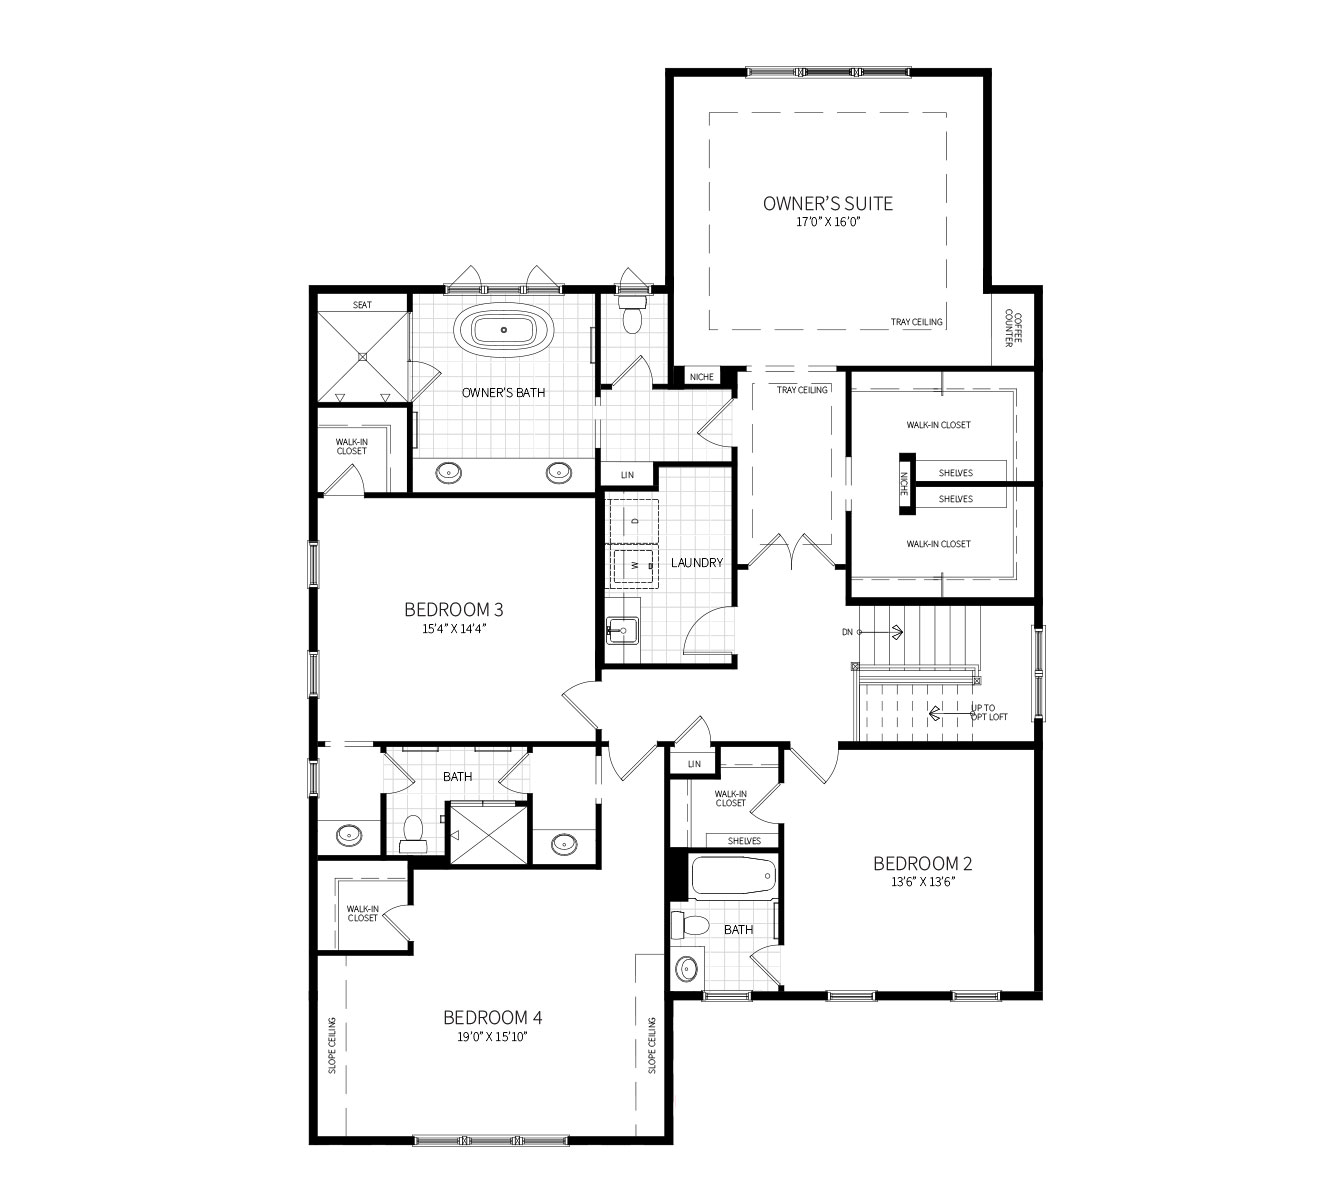 The second floor plan of the Willow model, featuring owner's suite, and 3 Bedrooms, each with Walk In Closet and bathroom access.